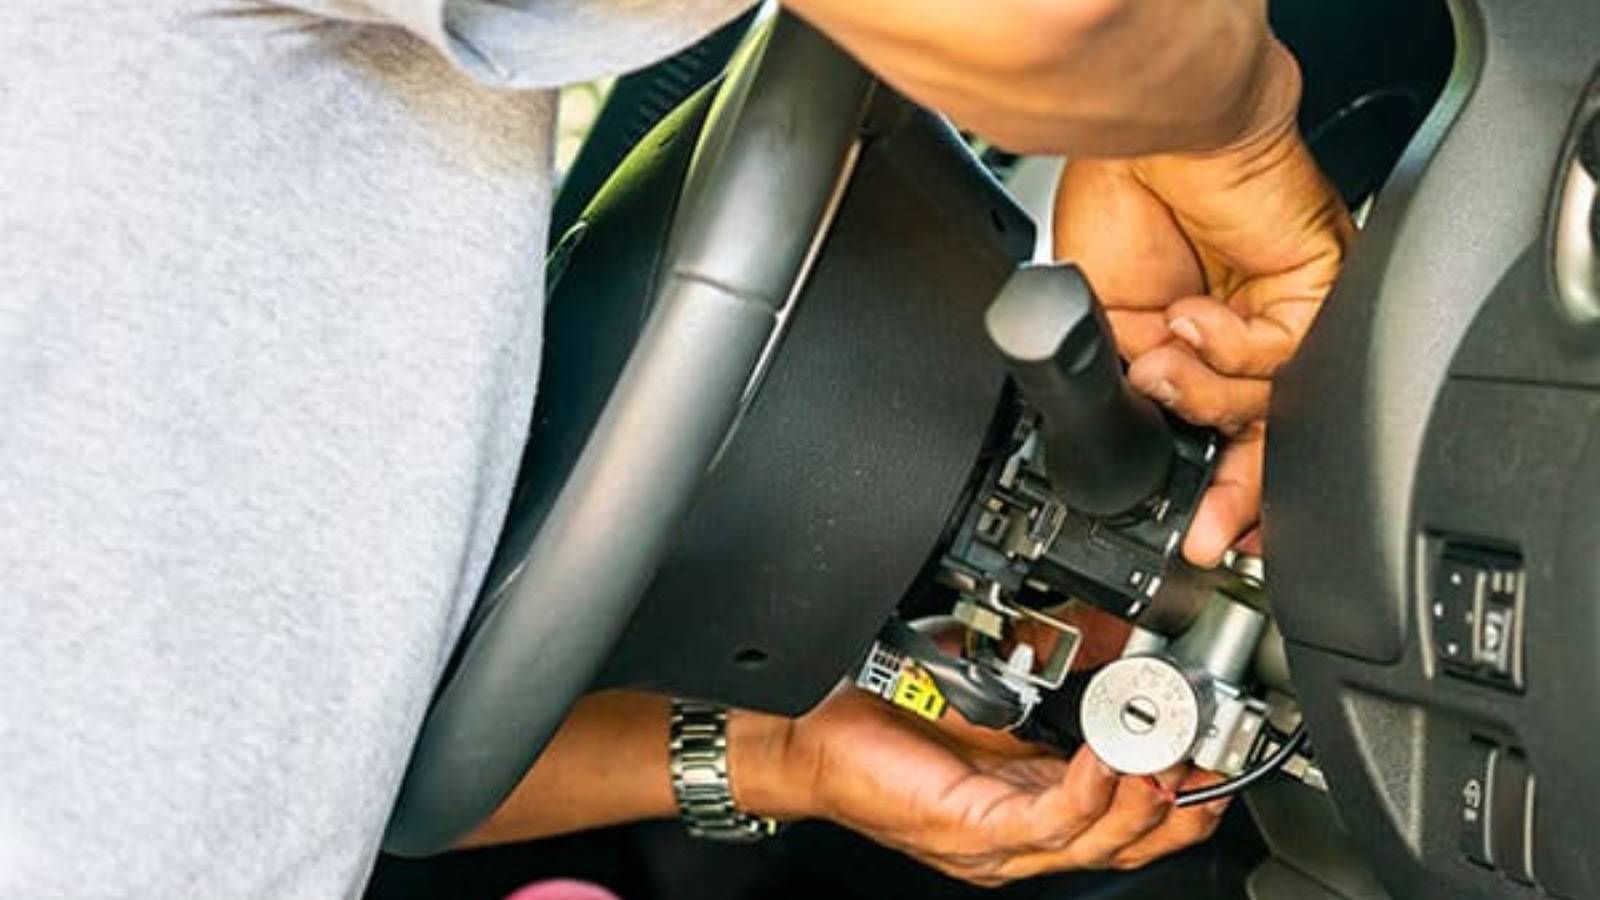 A locksmith doing ignition repair